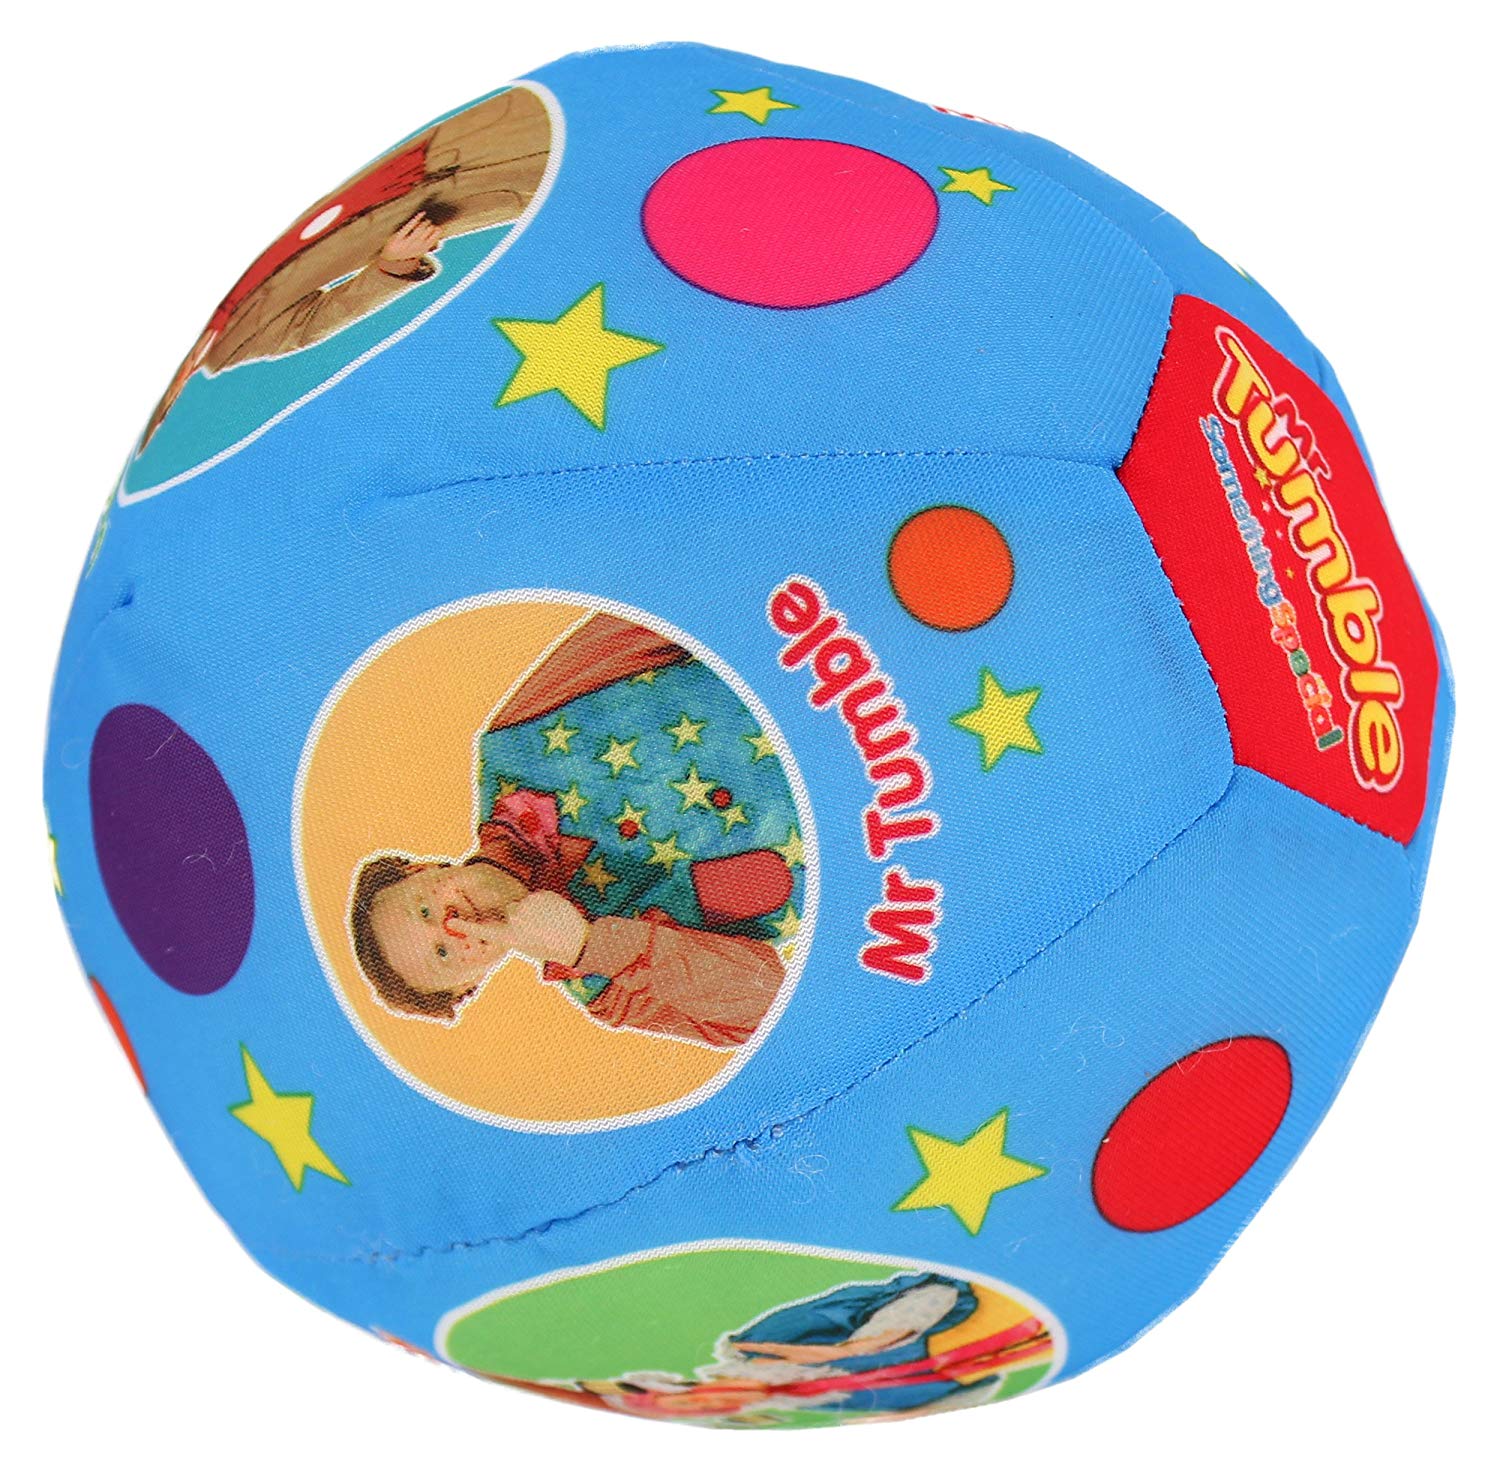 Mr Tumble Fun Sounds 24cm Soft Spotty Ball for sale online 